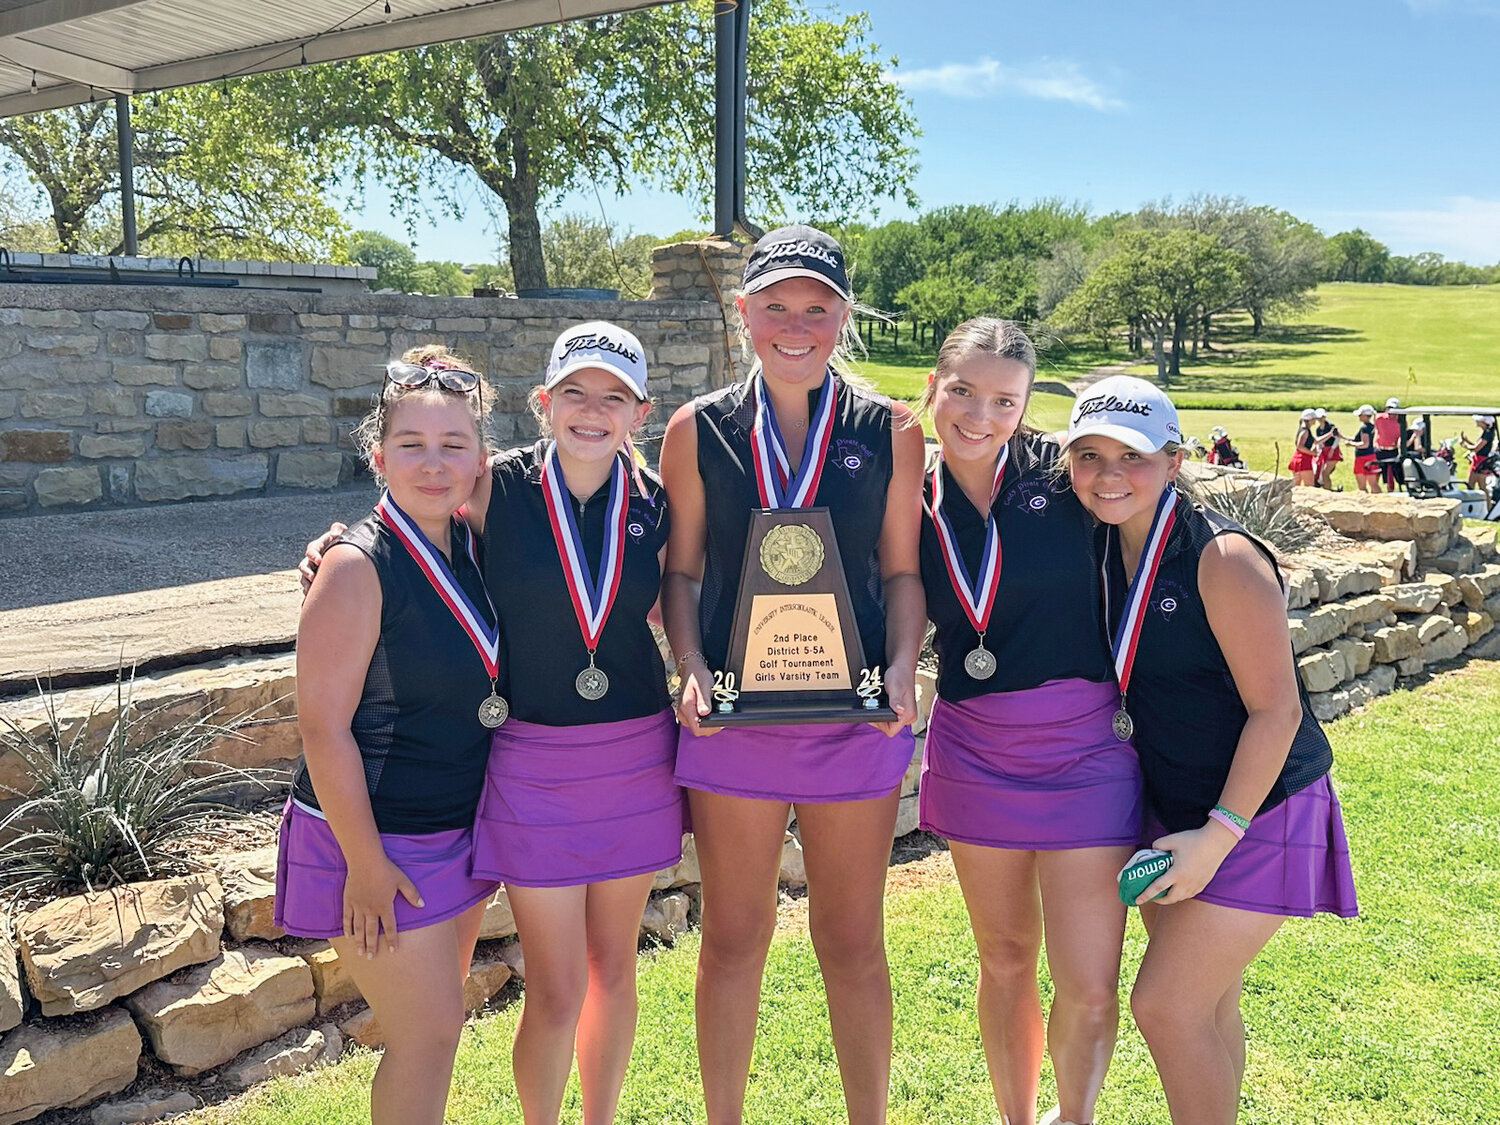 The Granbury Lady Pirates Purple team qualified for the Class 5A Region I Girls Golf Tournament in Lubbock by finishing second in the District 5-5A Tournament. Pictured are (from left) Grace Jimenez, Claire Jordan, Akyah Ditto, Halle Carr and Ariel Jimenez.